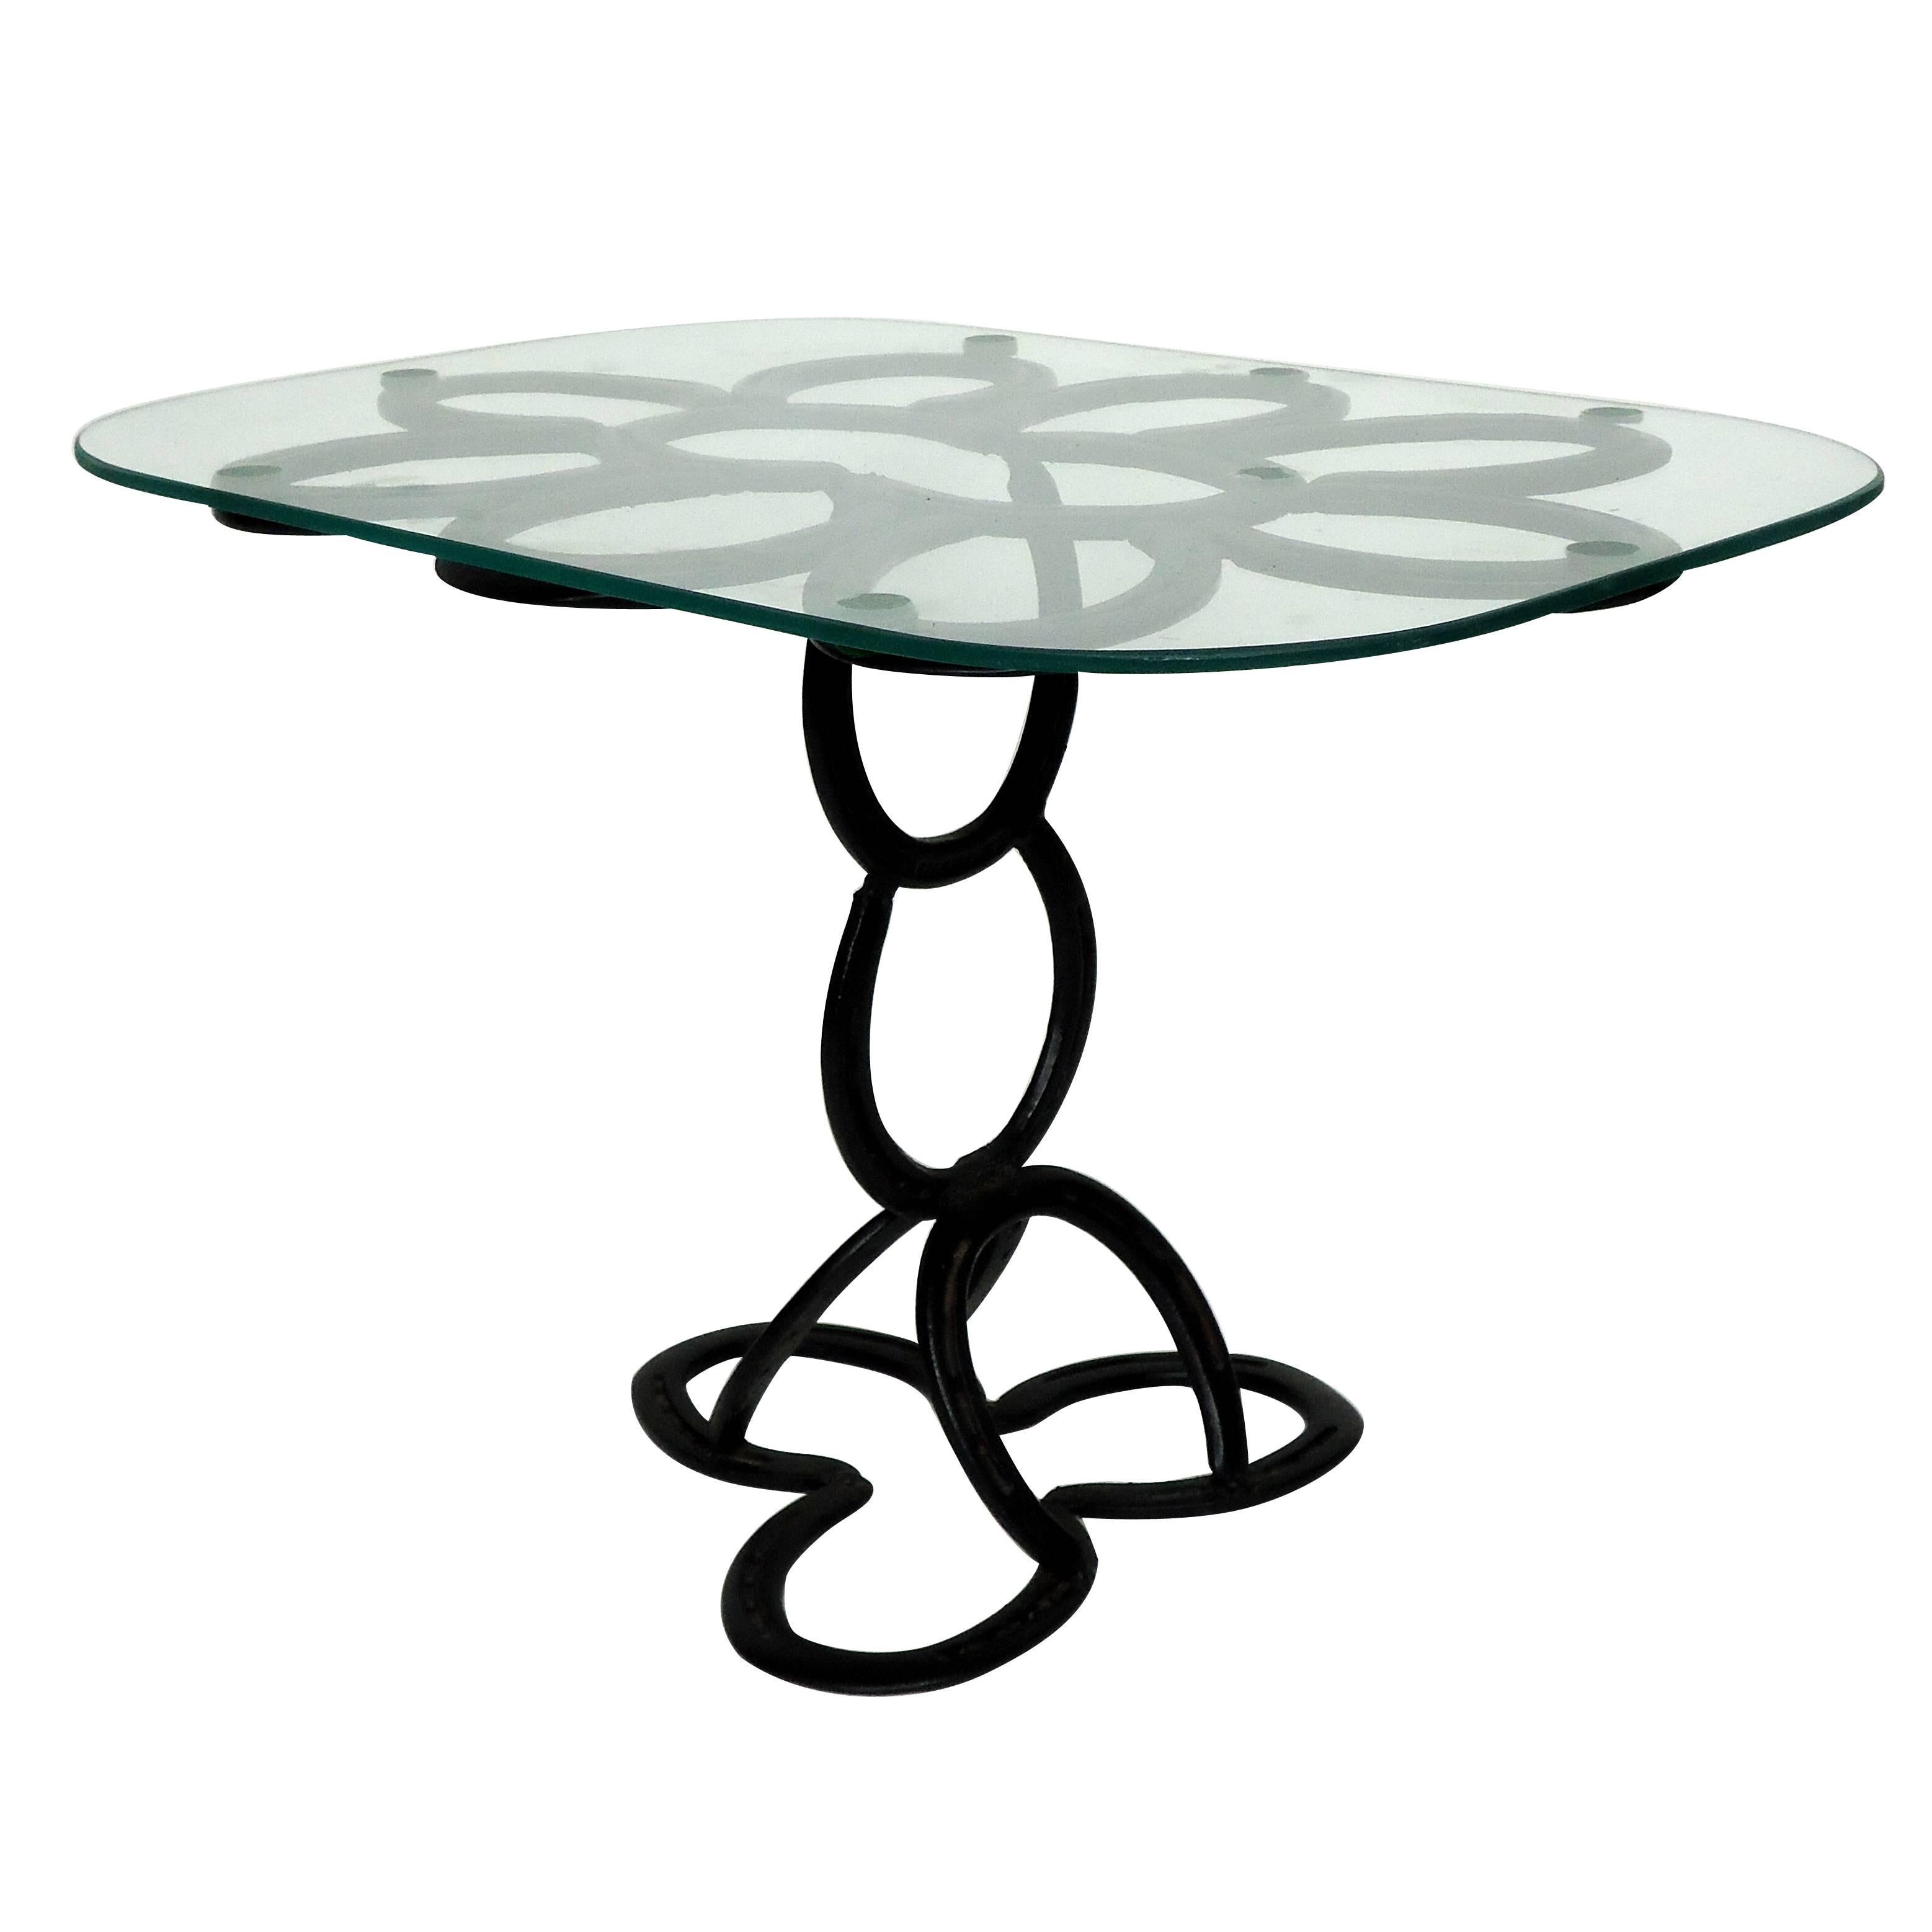 Lyrical Wrought Iron Side Table Made from St. Croix Forge Horseshoes, circa 1985